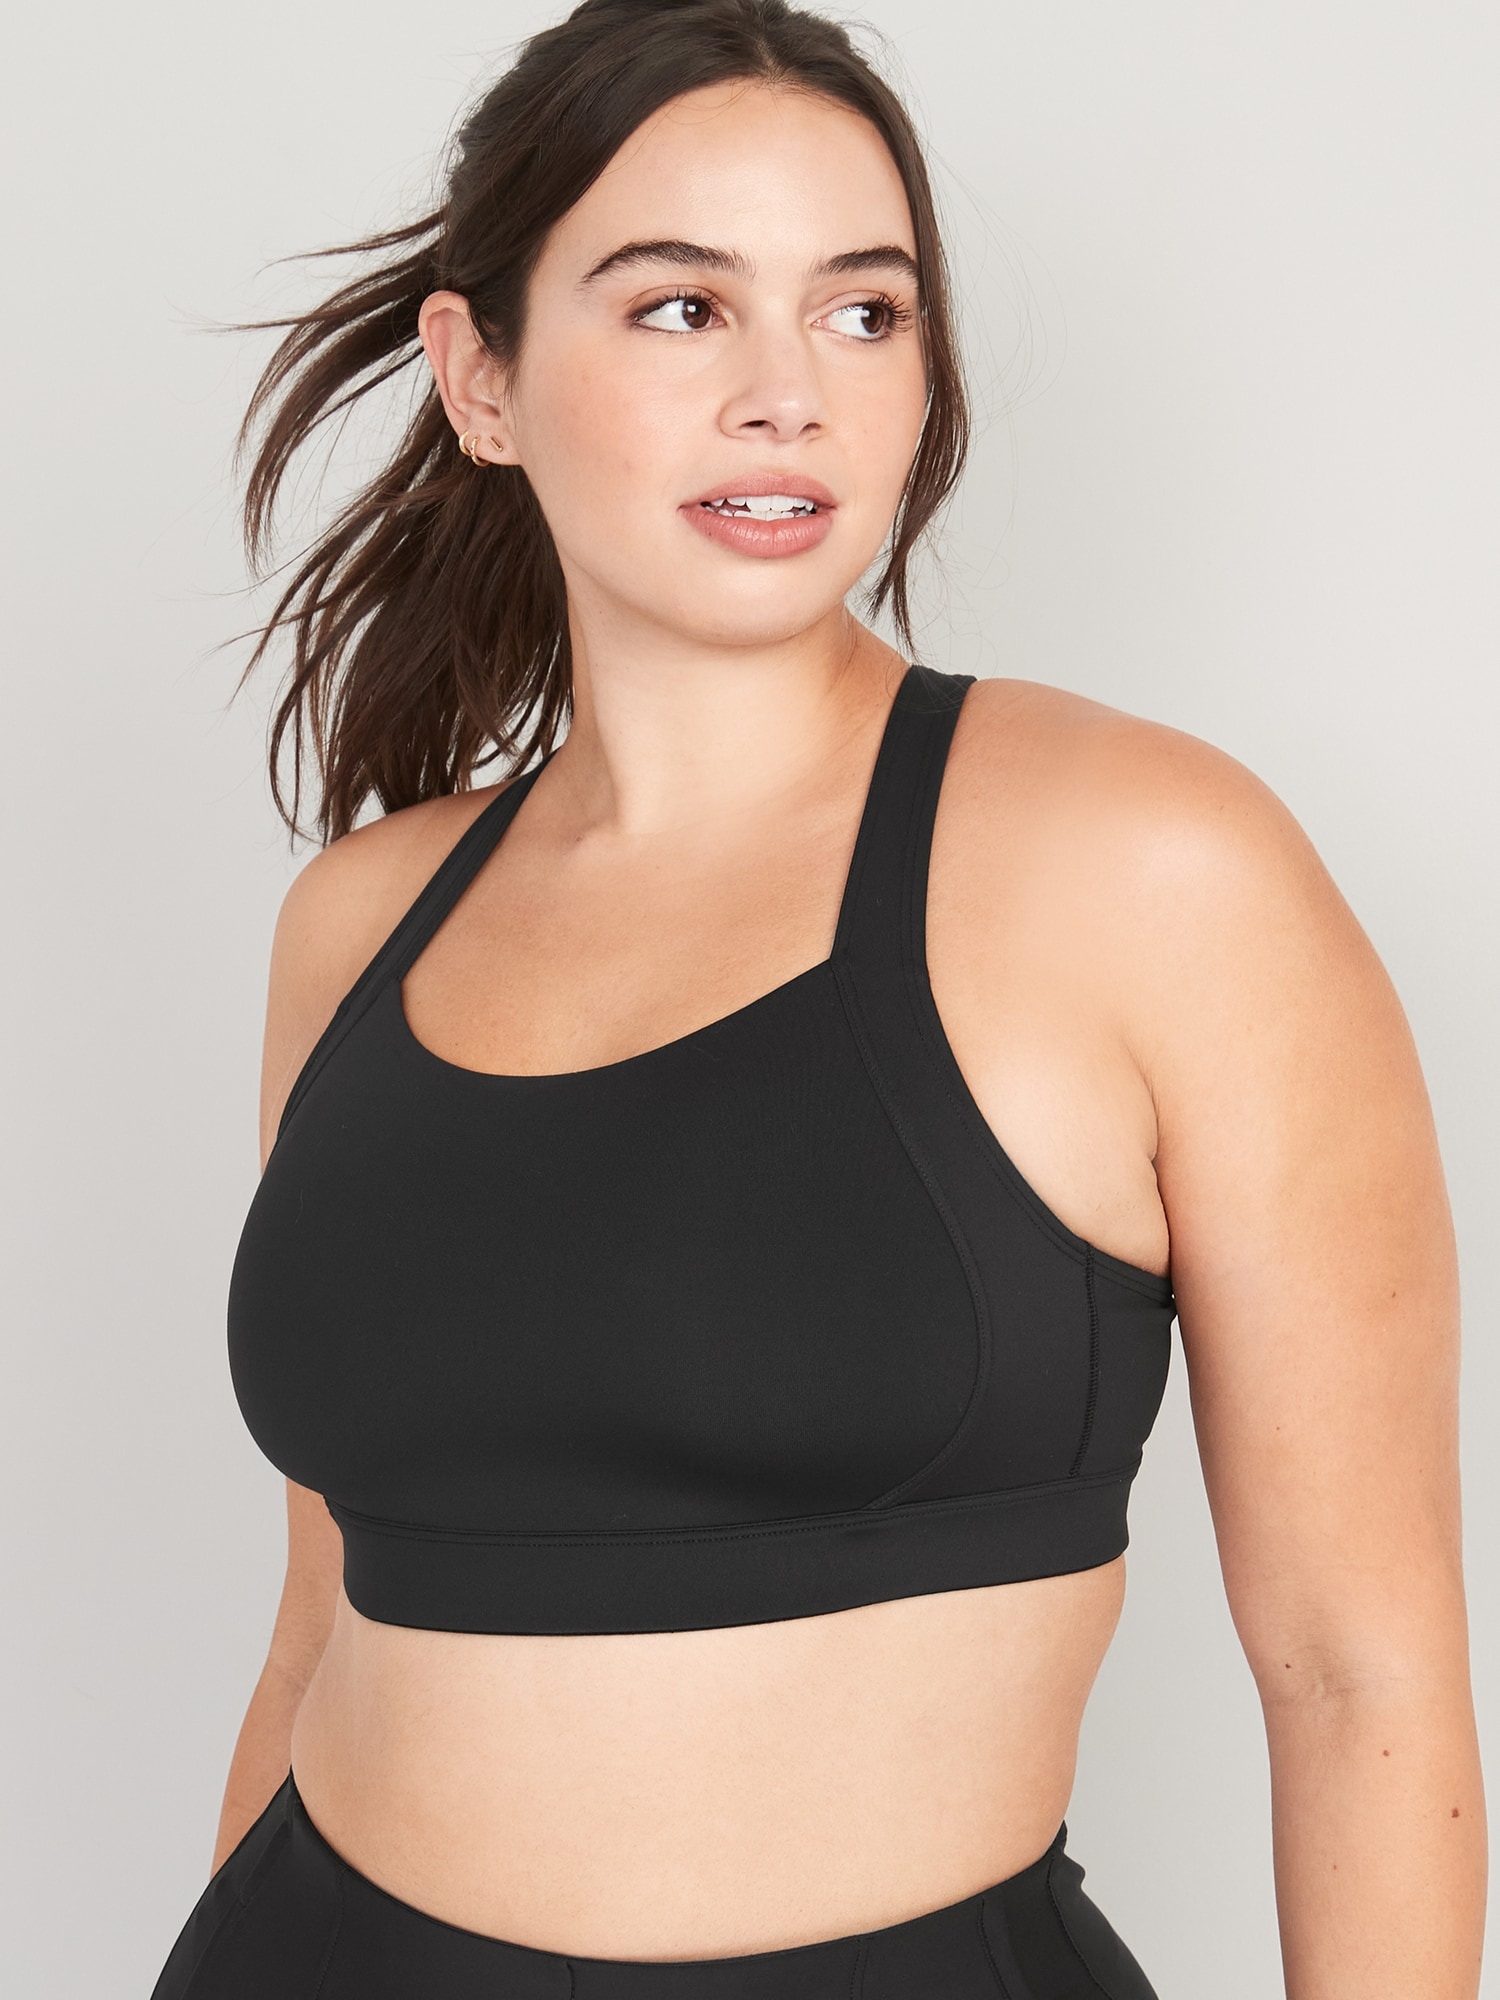 High Support Cross-Back Sports Bra for Women 2X-4X, Old Navy